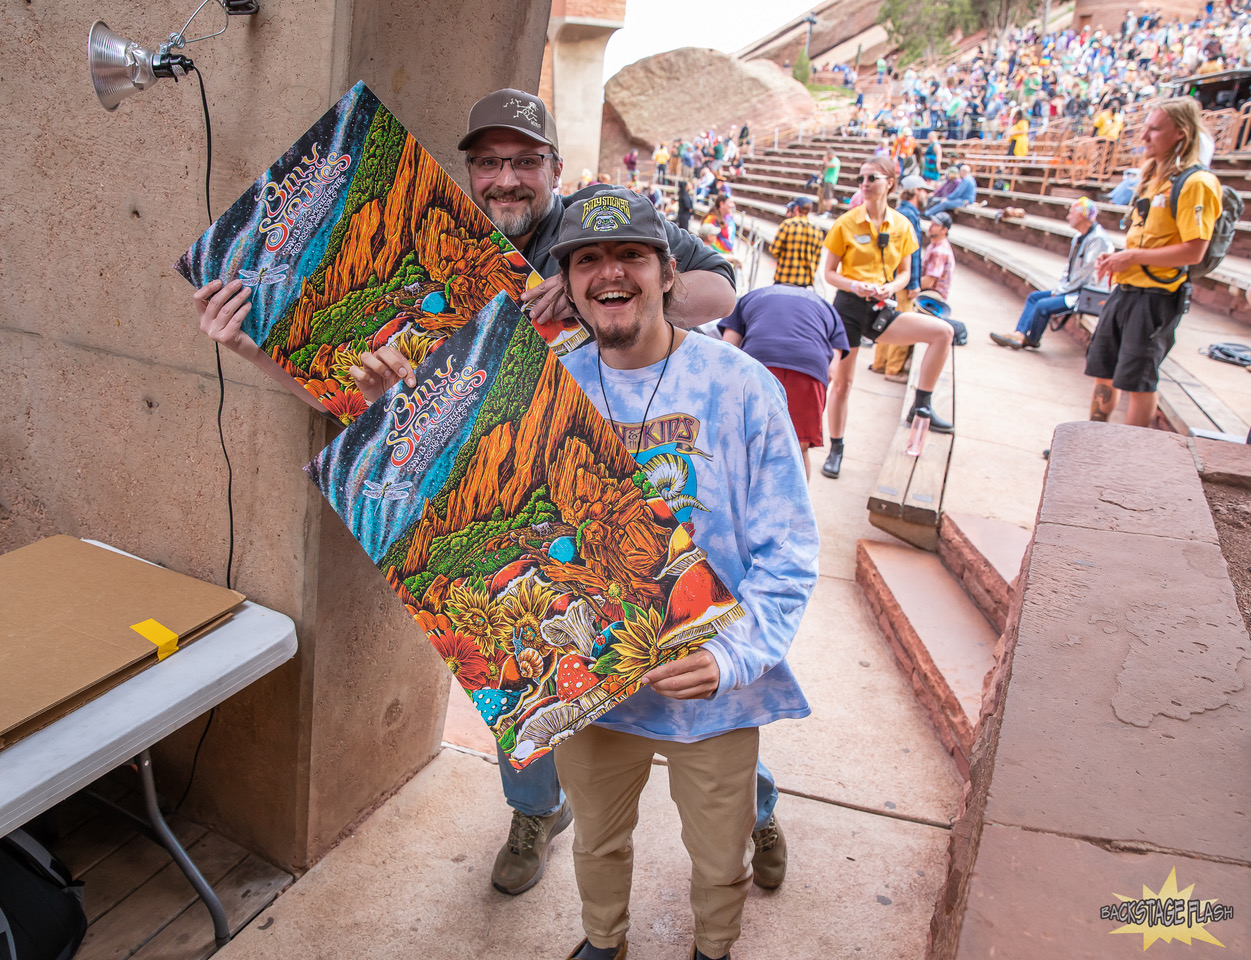 Billy Fans at Red Rocks | Photo by Backstage Flash